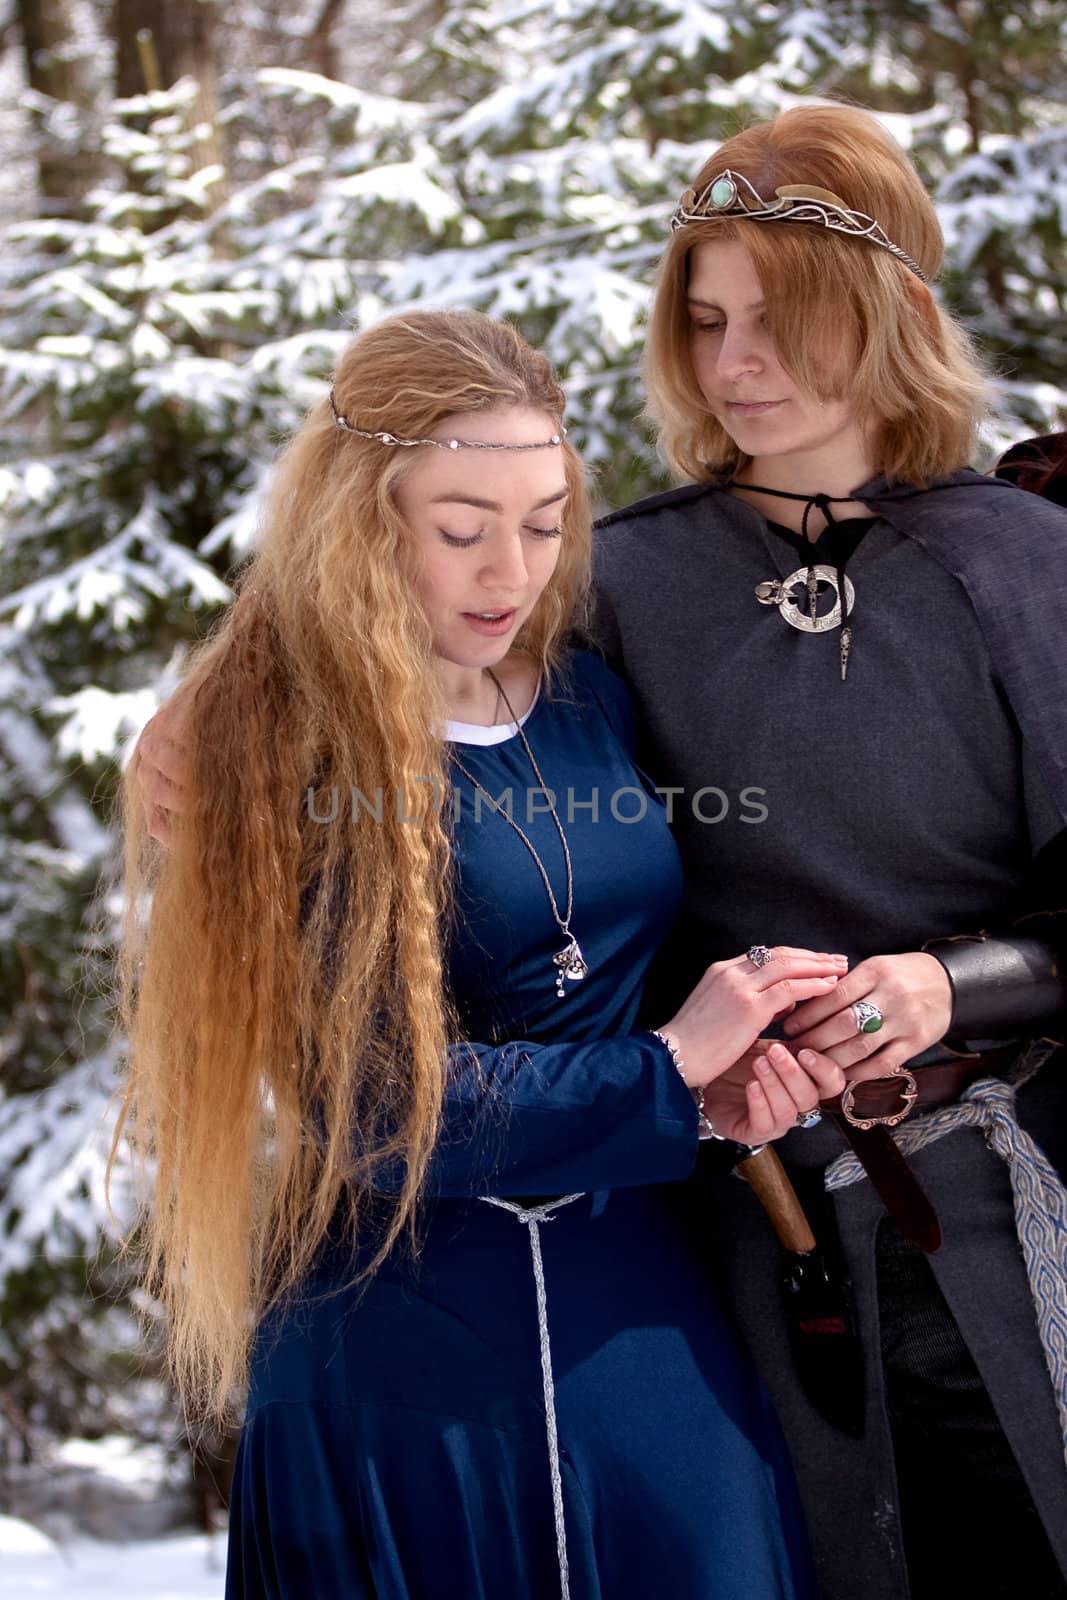 Two ladies in medieval dresses in winter forest
